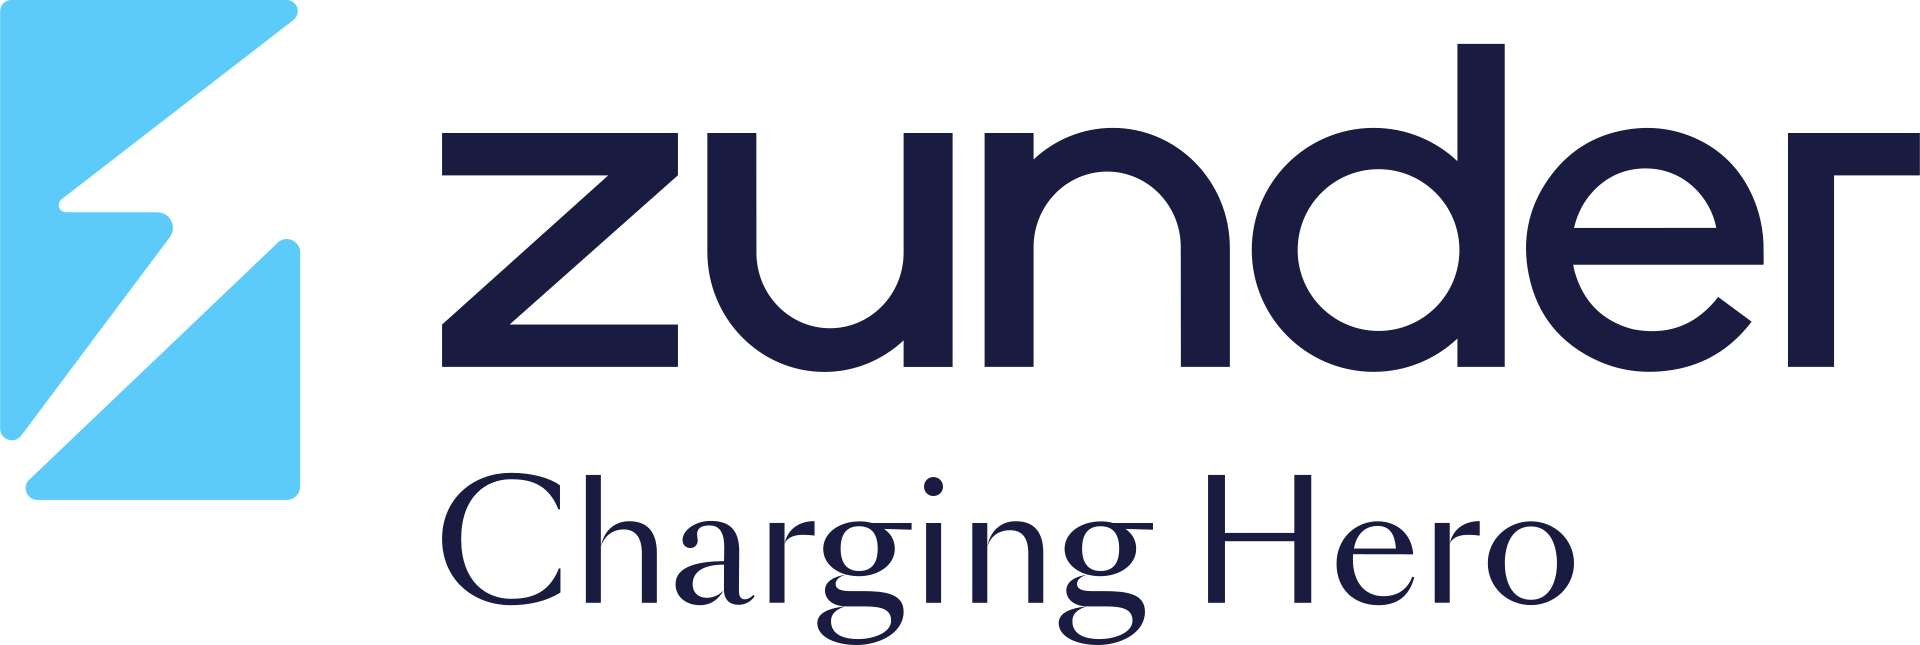 Charge card logo of Zunder